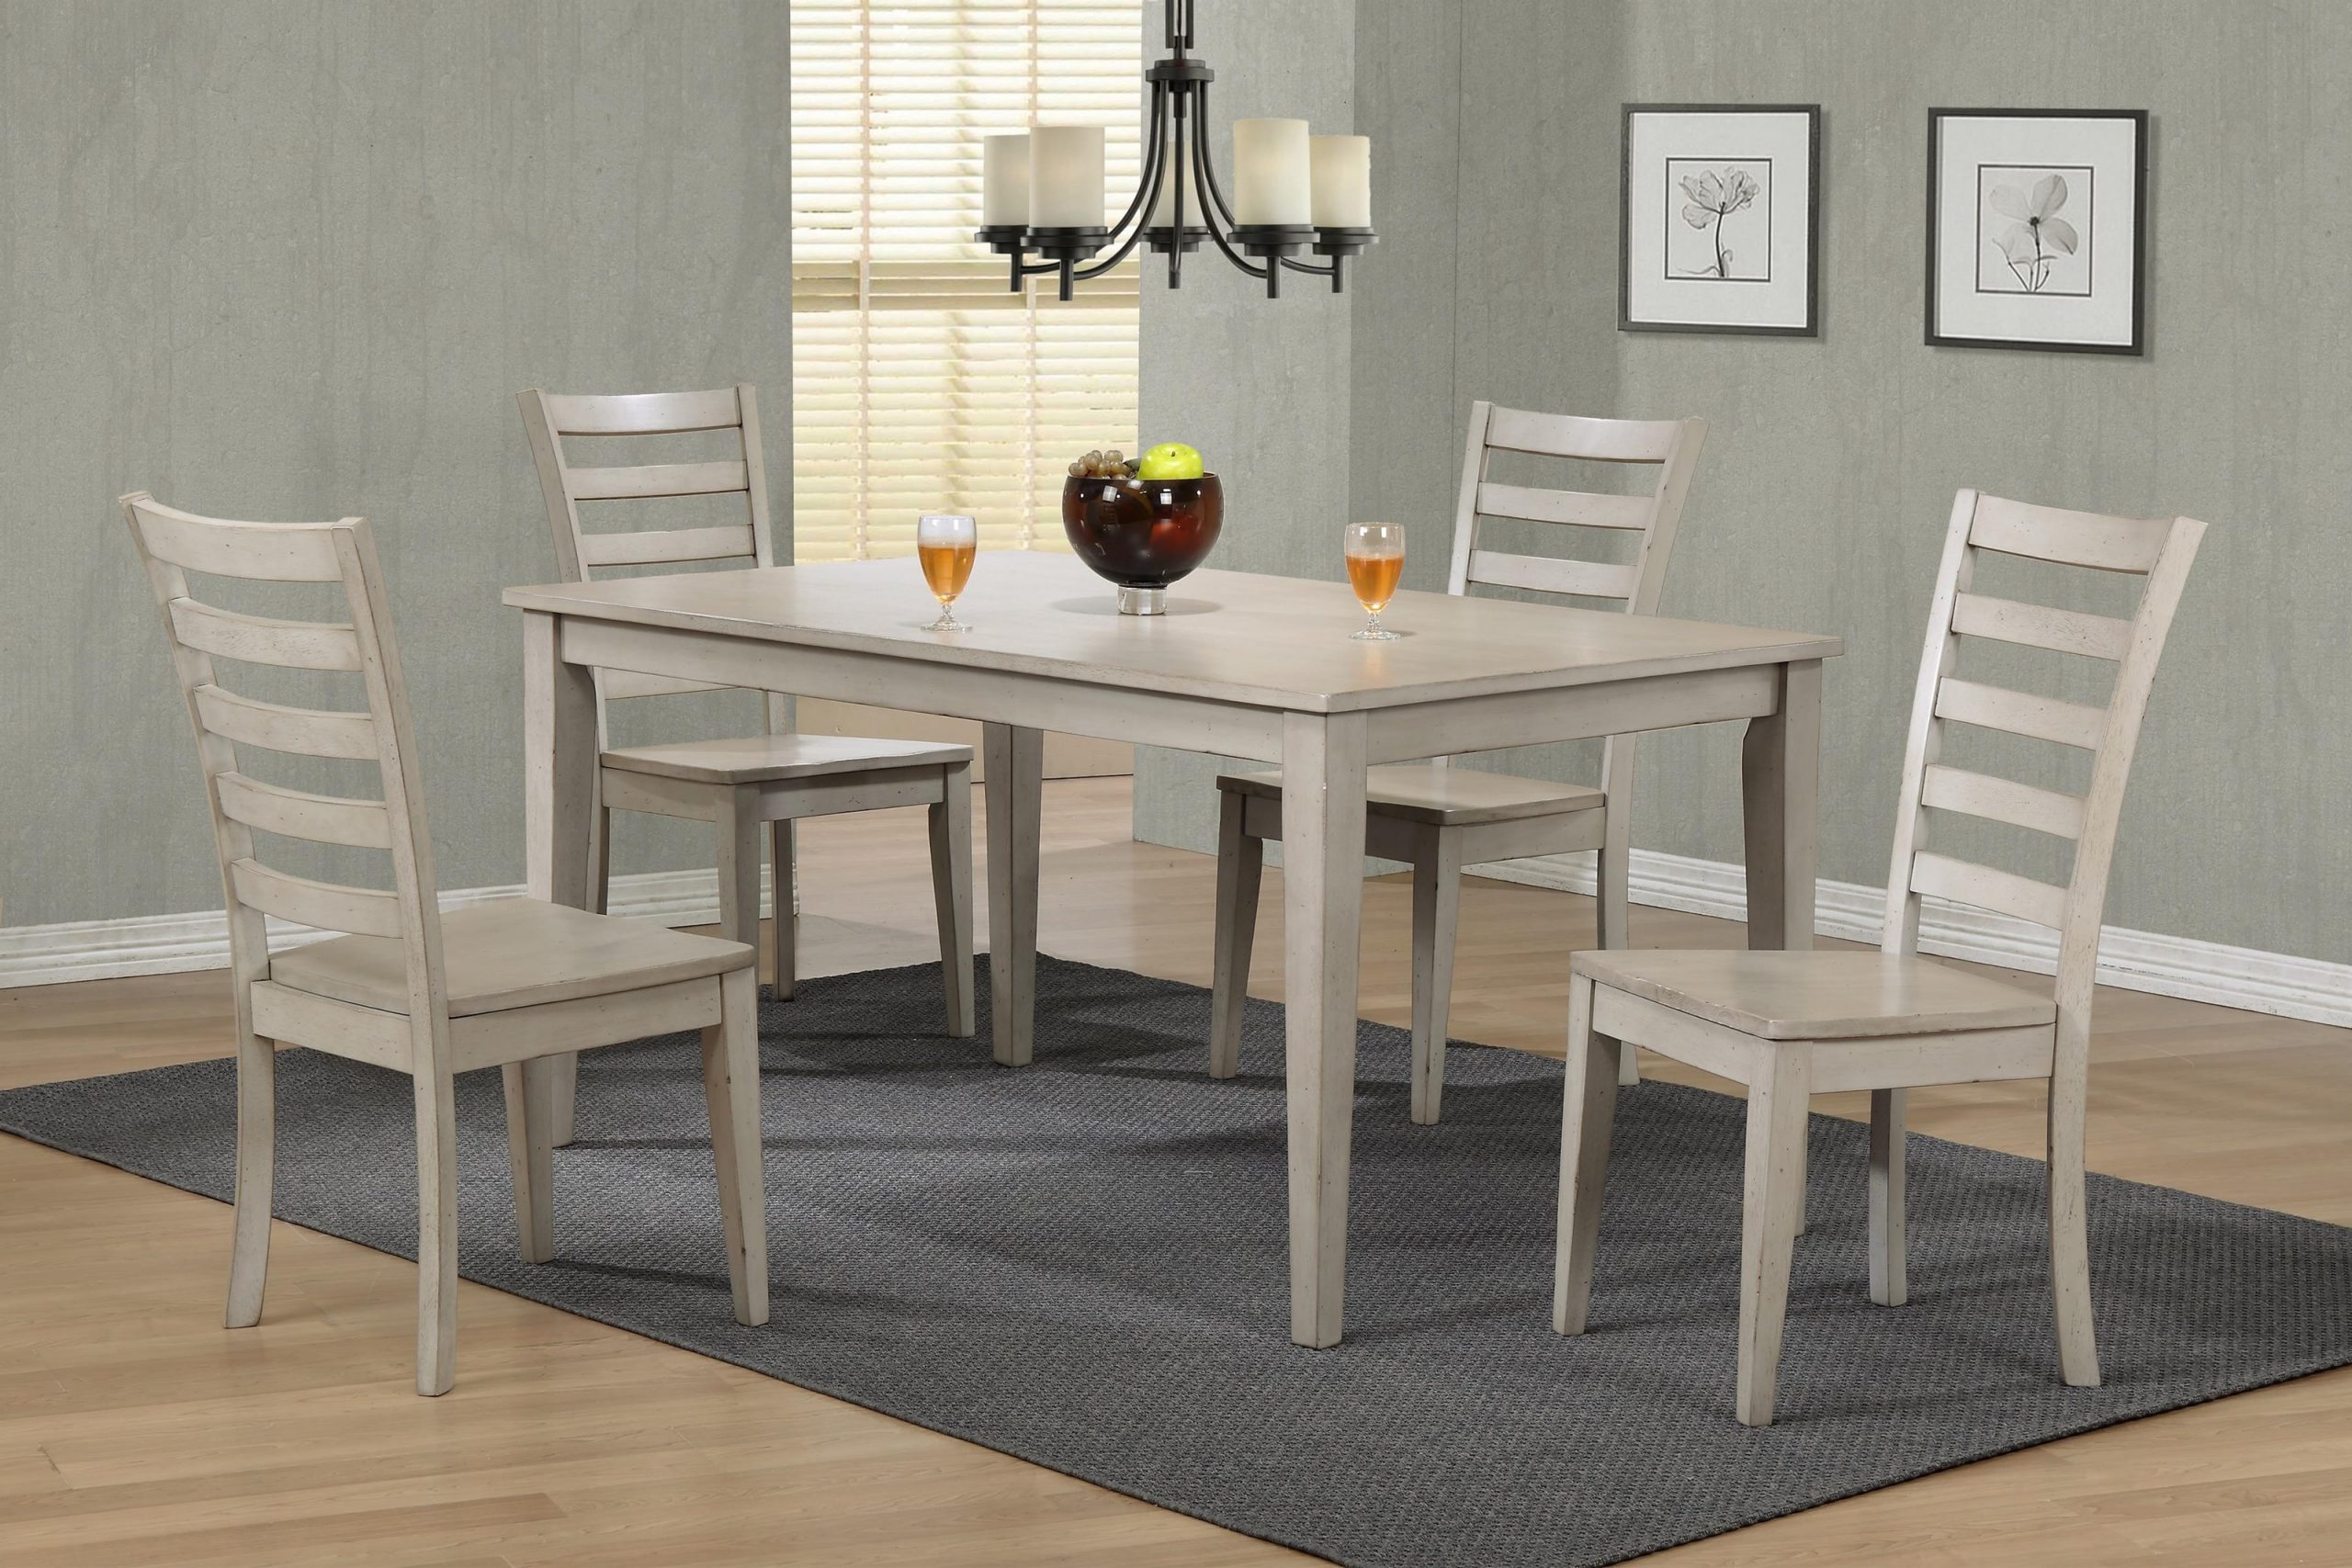 Carmel Table 4 Chairs inside sizing 3200 X 2134